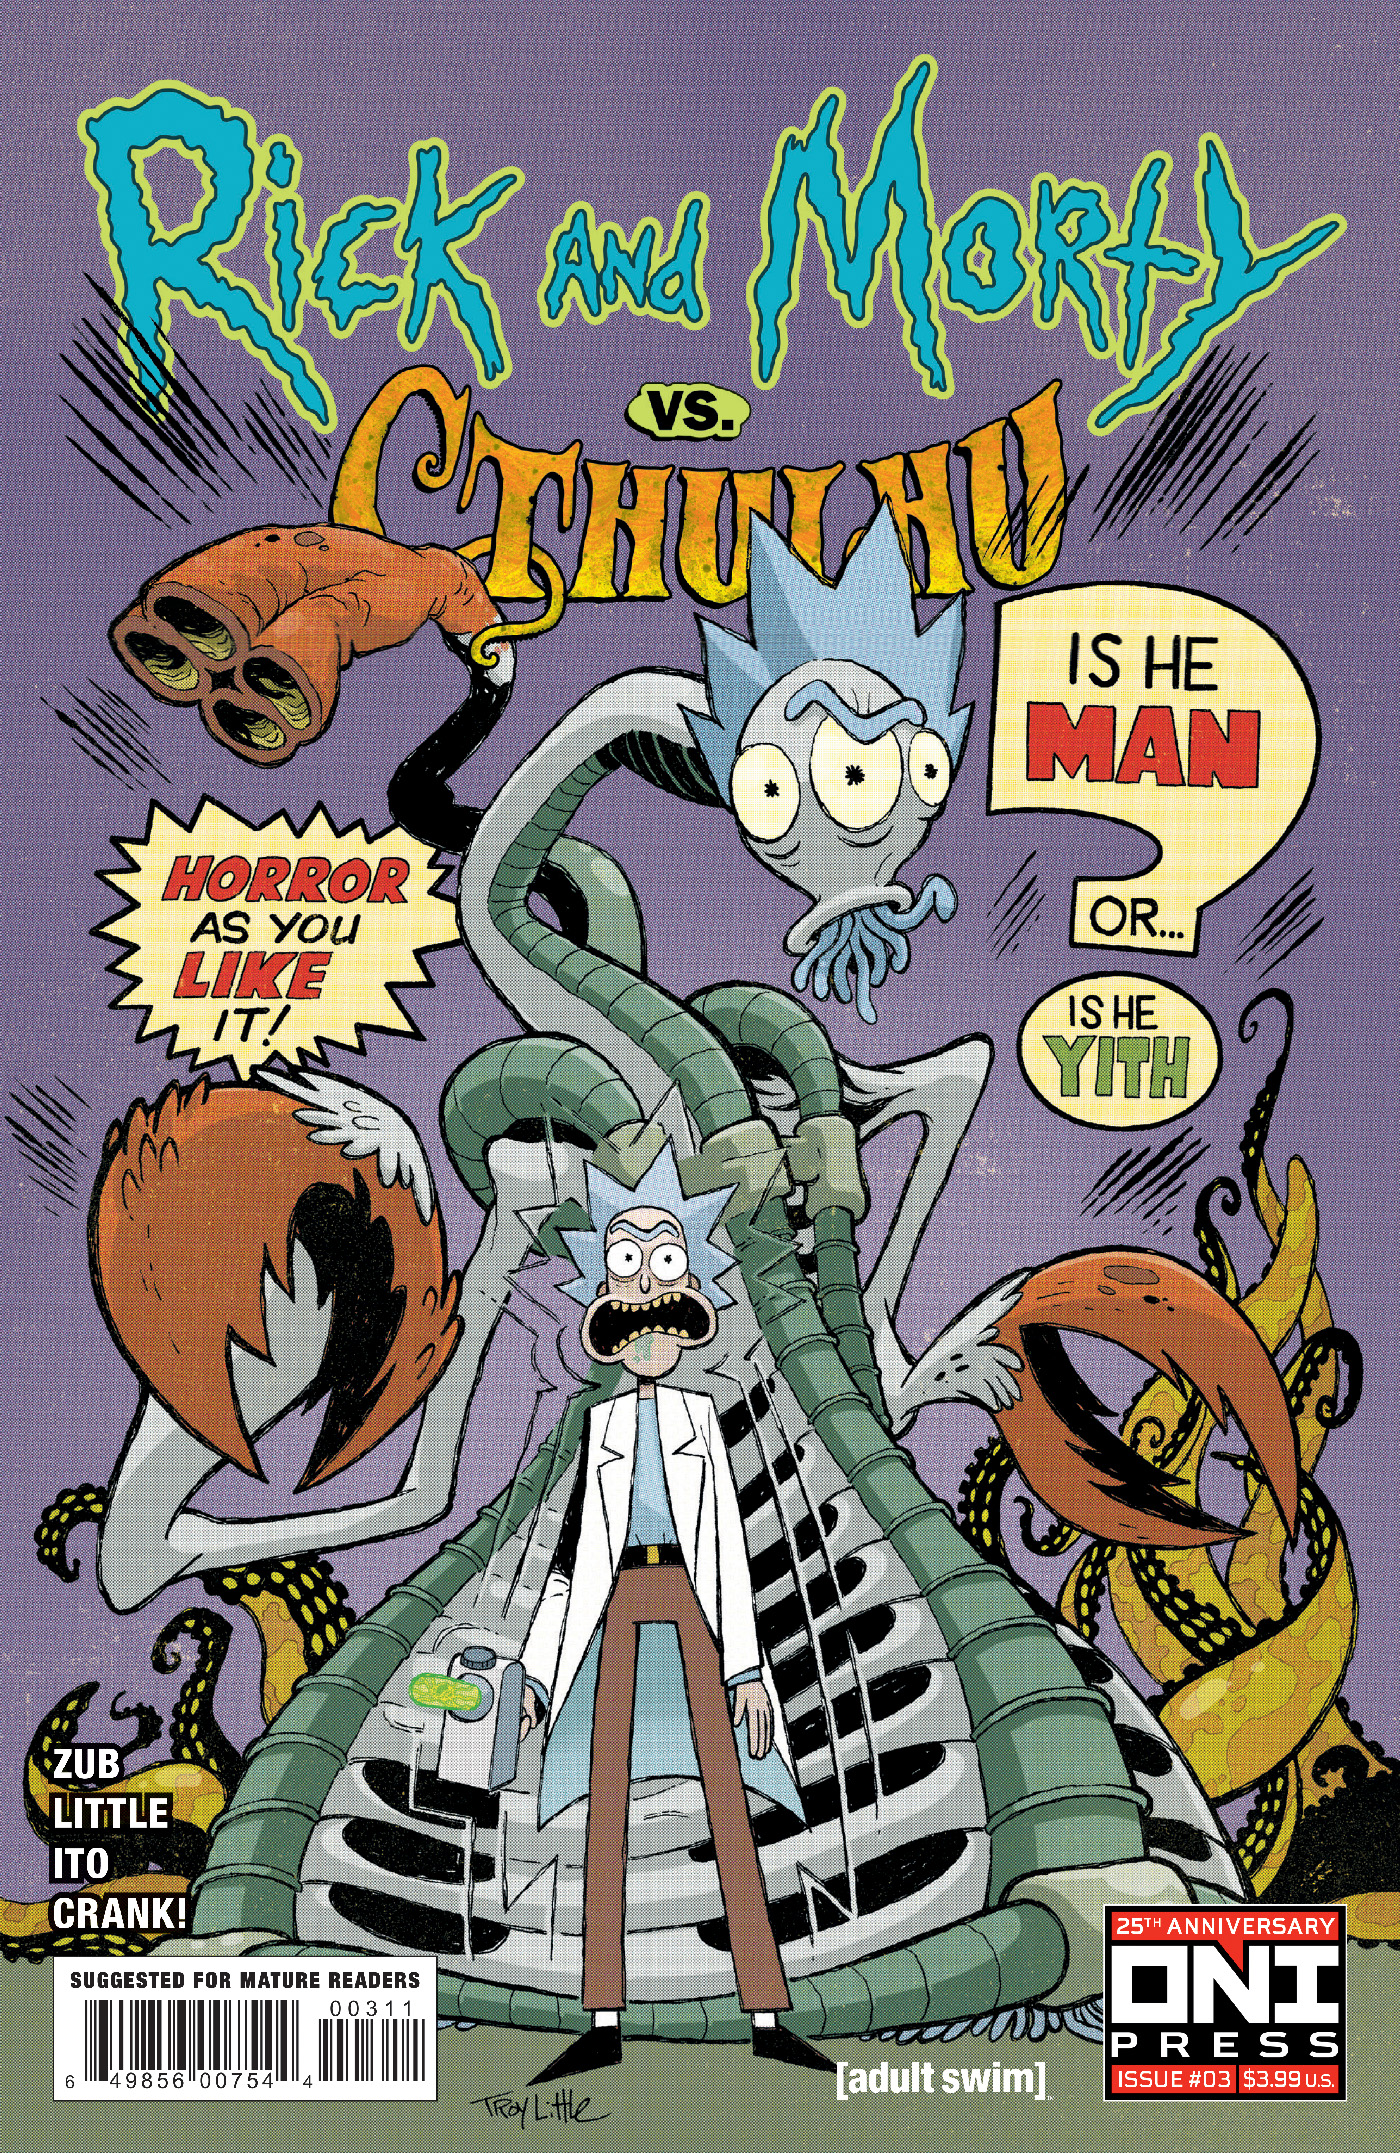 Rick and Morty Vs Cthulhu #3 Cover A Little